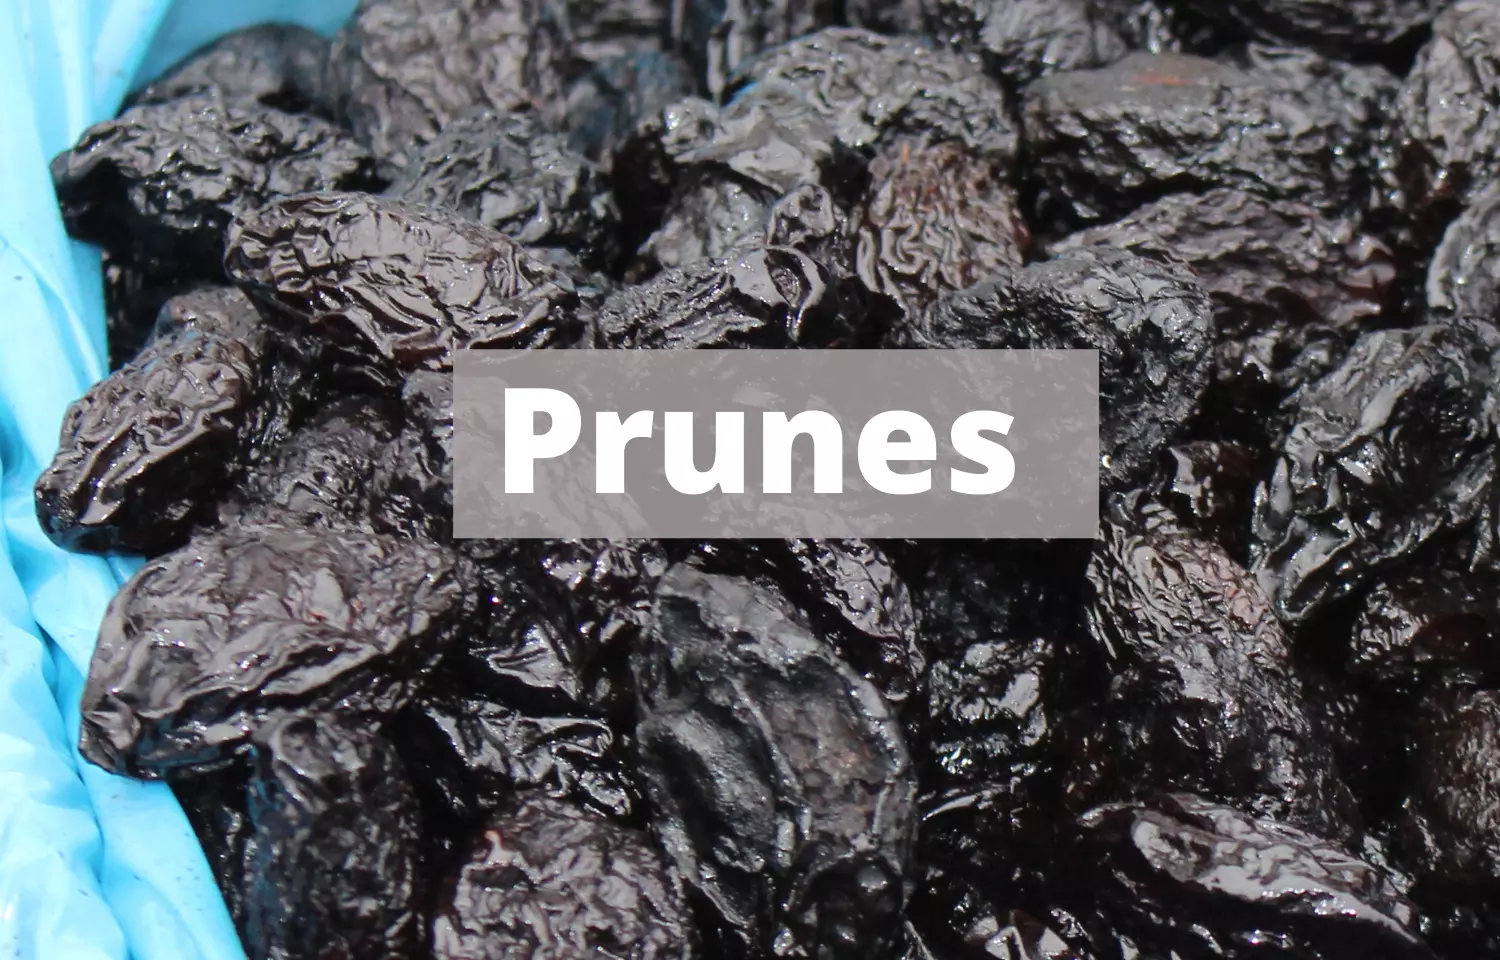 Prunes have promising effect on mens bone health, finds study